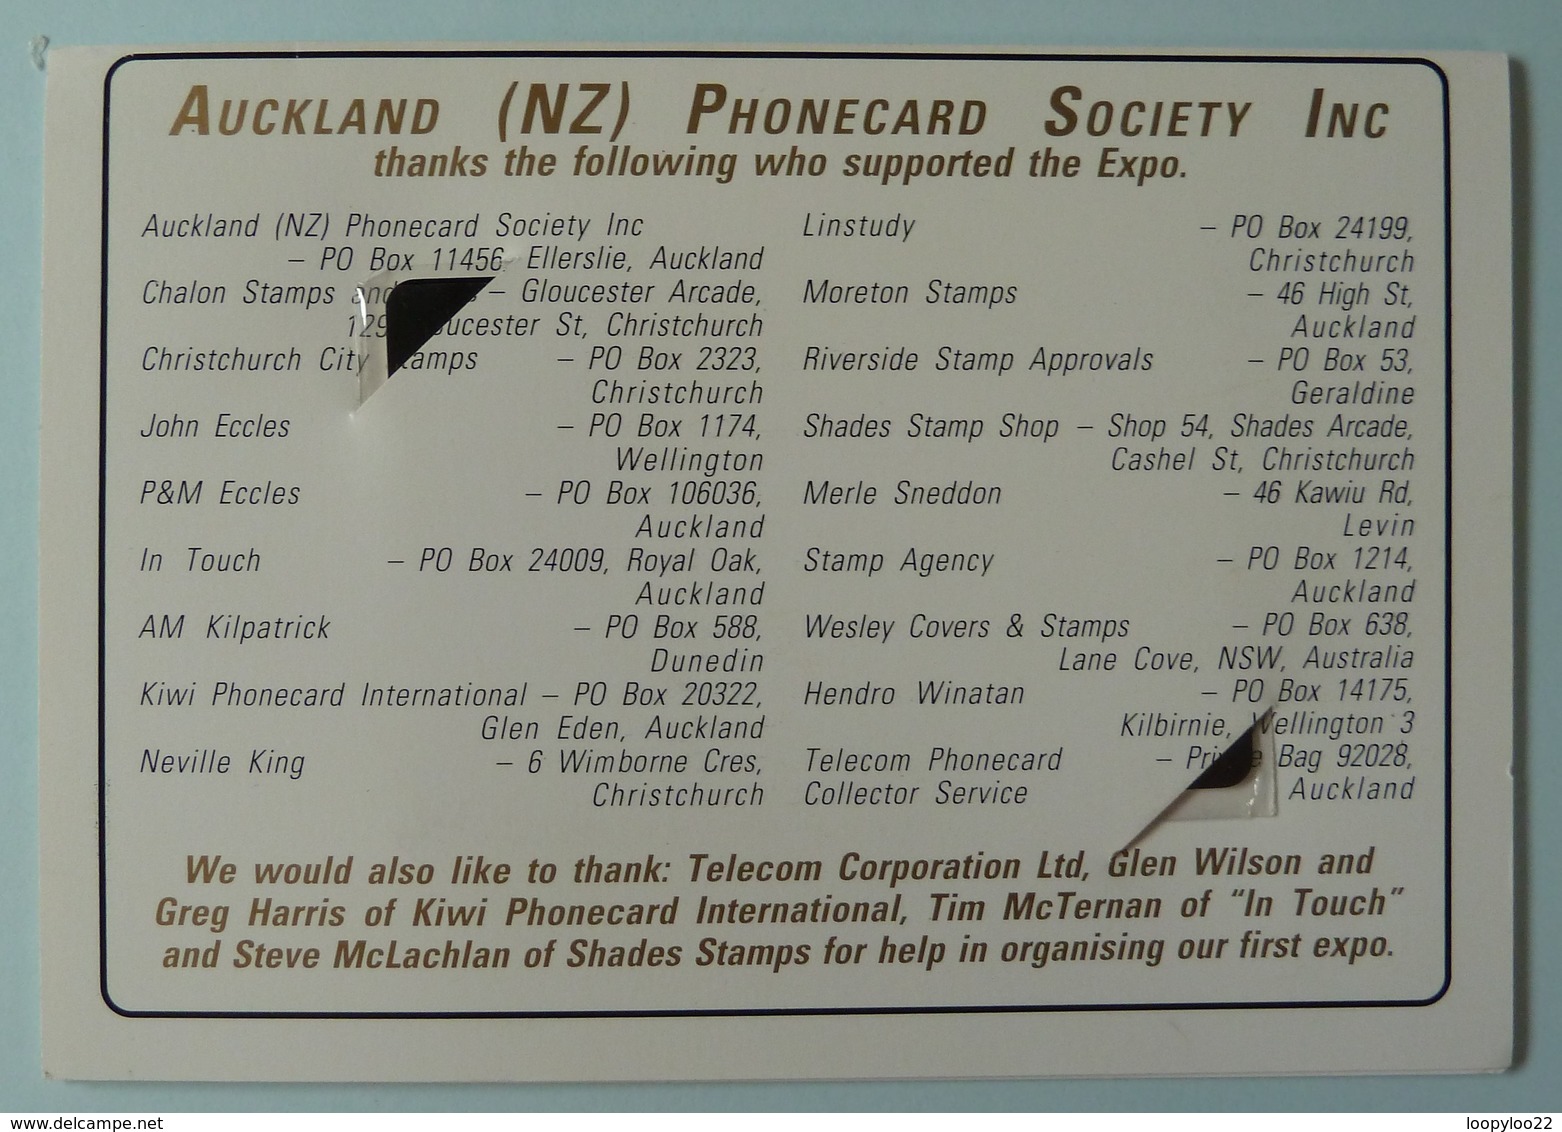 New Zealand - GPT - Auckland Phonecard Society - Expo - 1992 - Avondale Spider - $5 - Mint In Folder - New Zealand